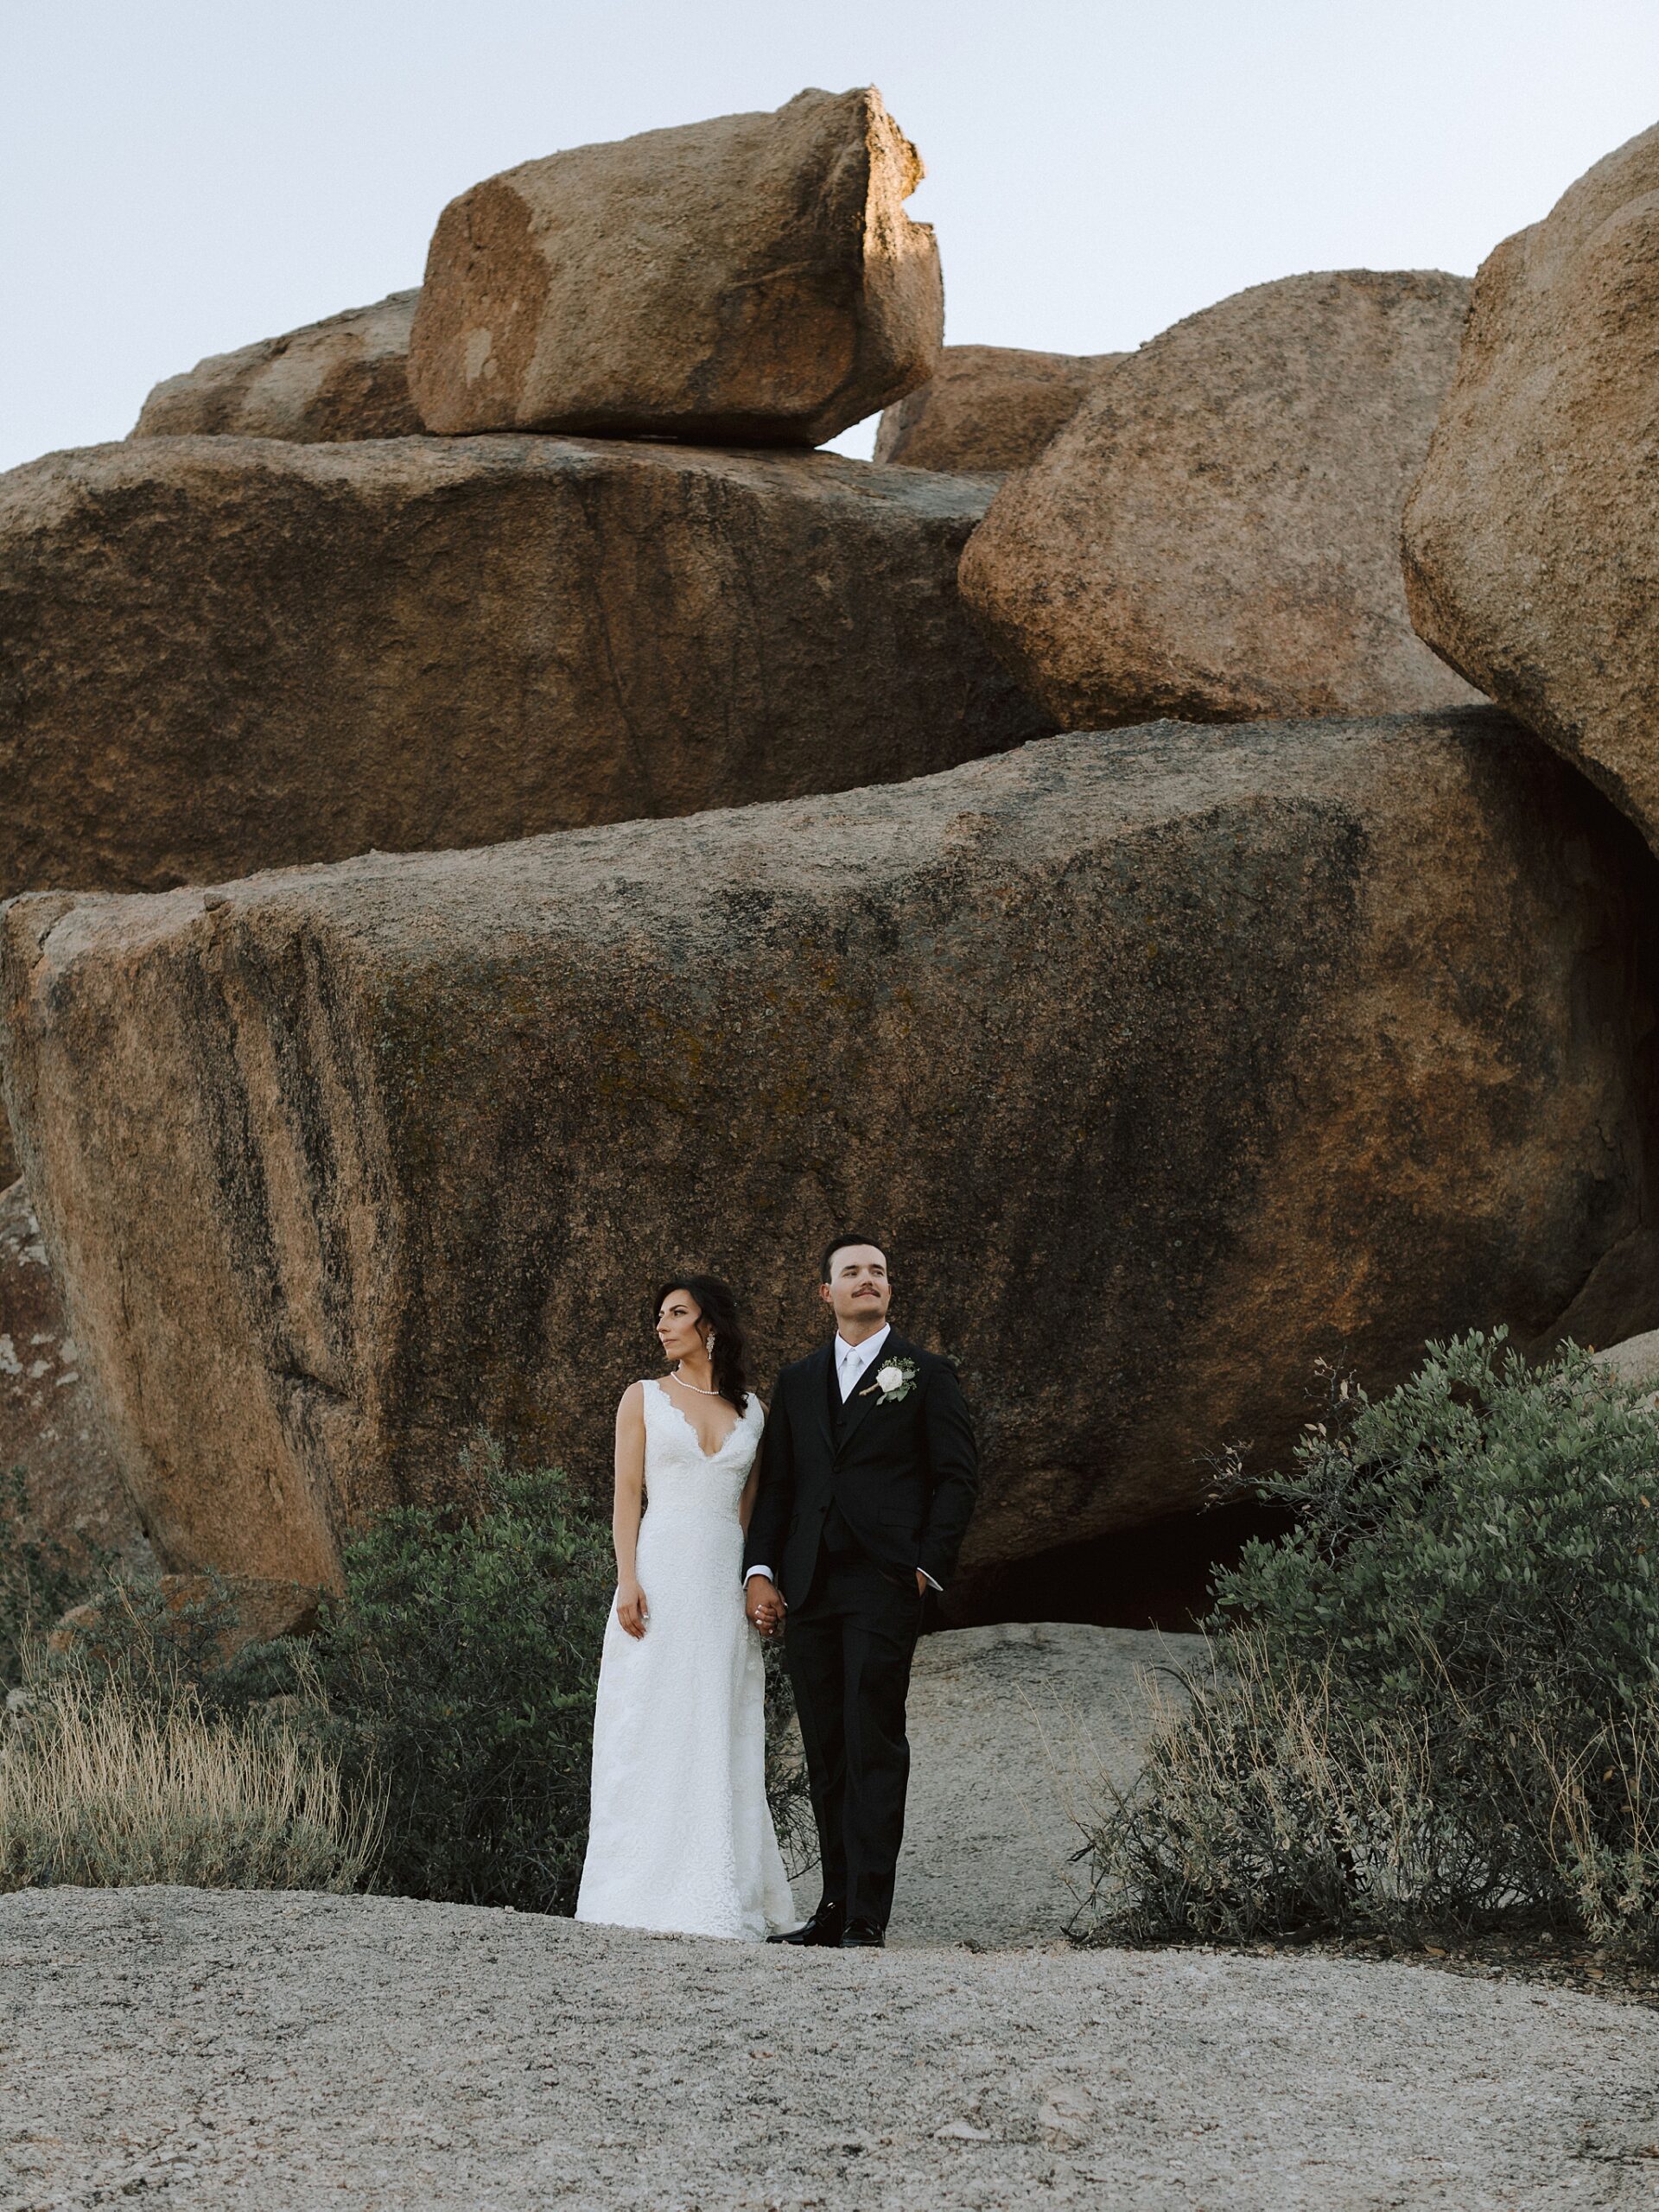 Wedding at the Boulders Resort, Bride and Groom Formals, The Hoskins Photography